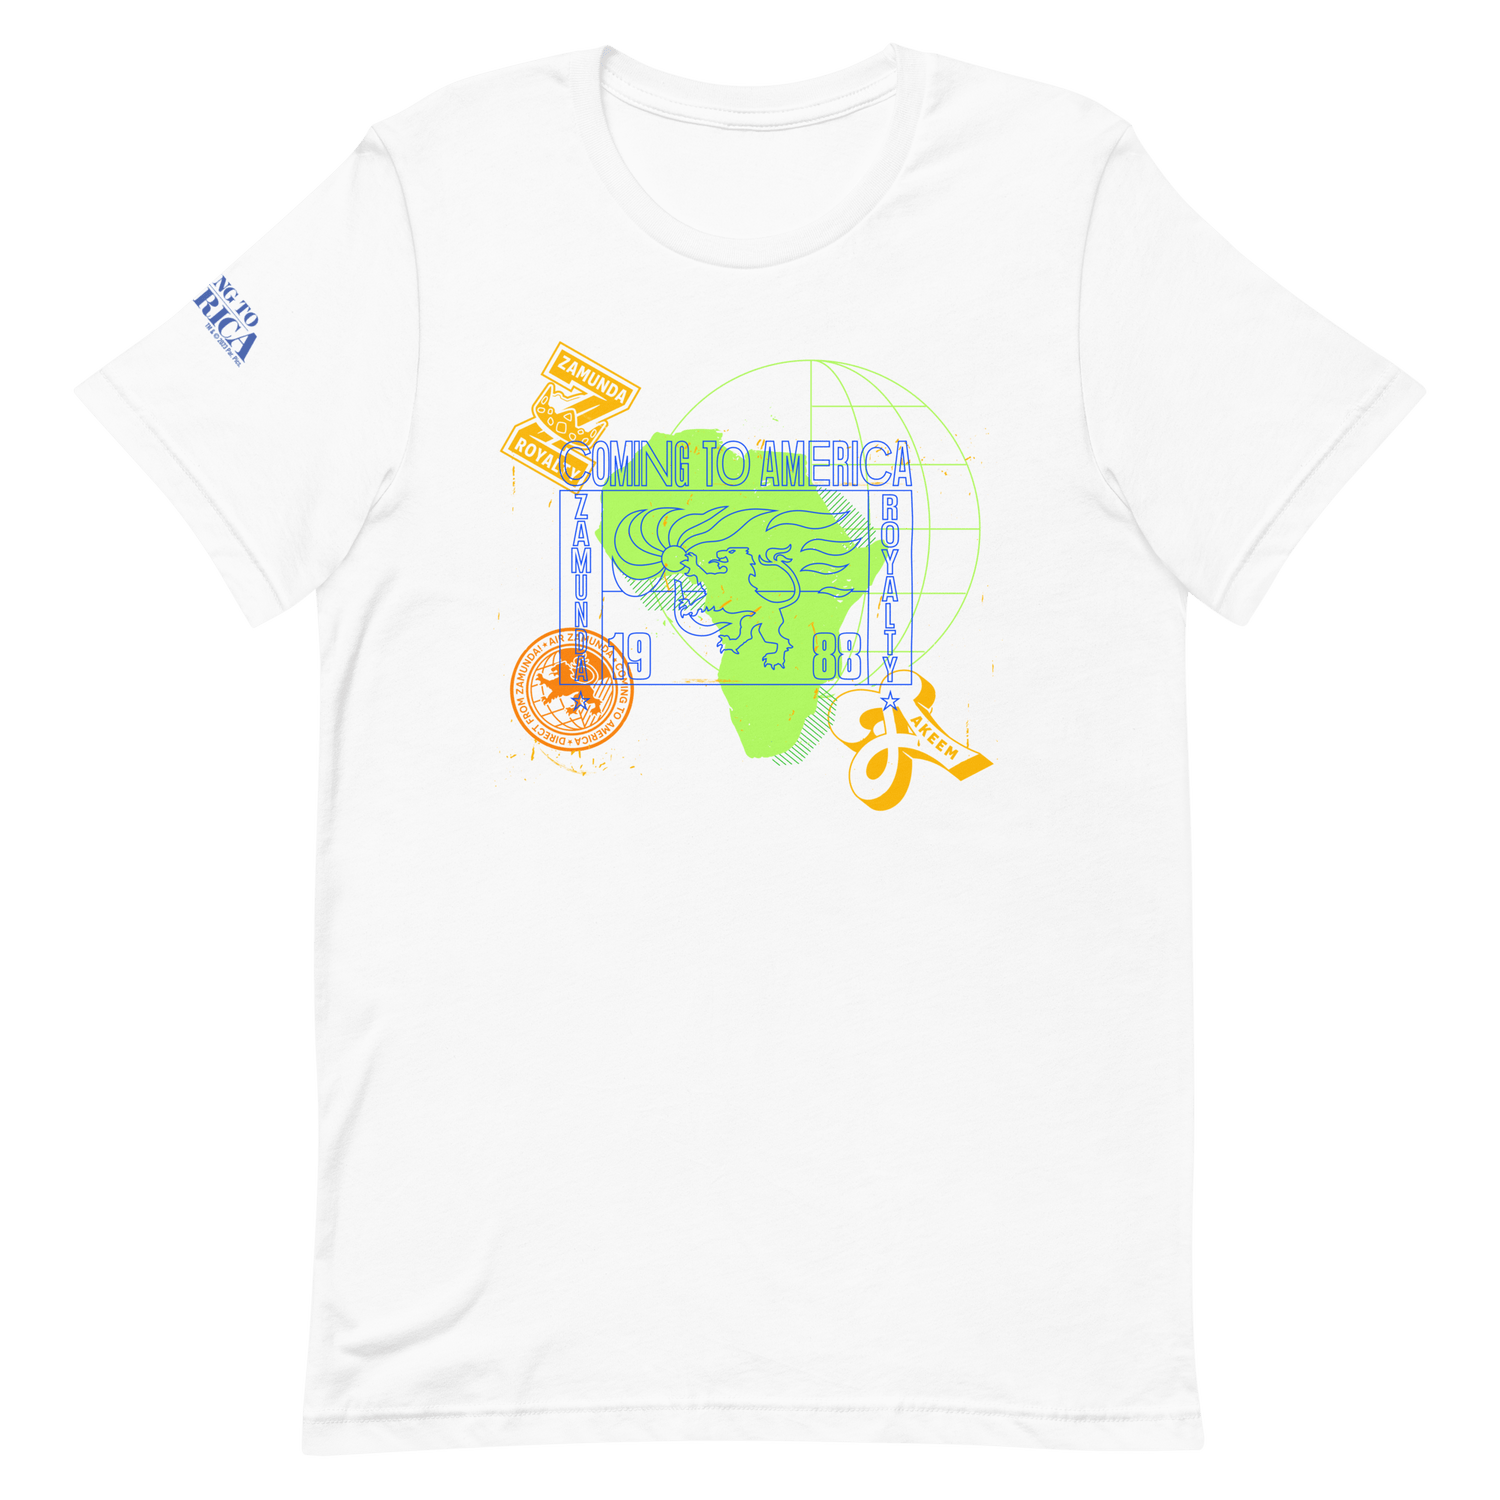 Coming To America Passport Stamp Adult Short Sleeve T - Shirt - Paramount Shop